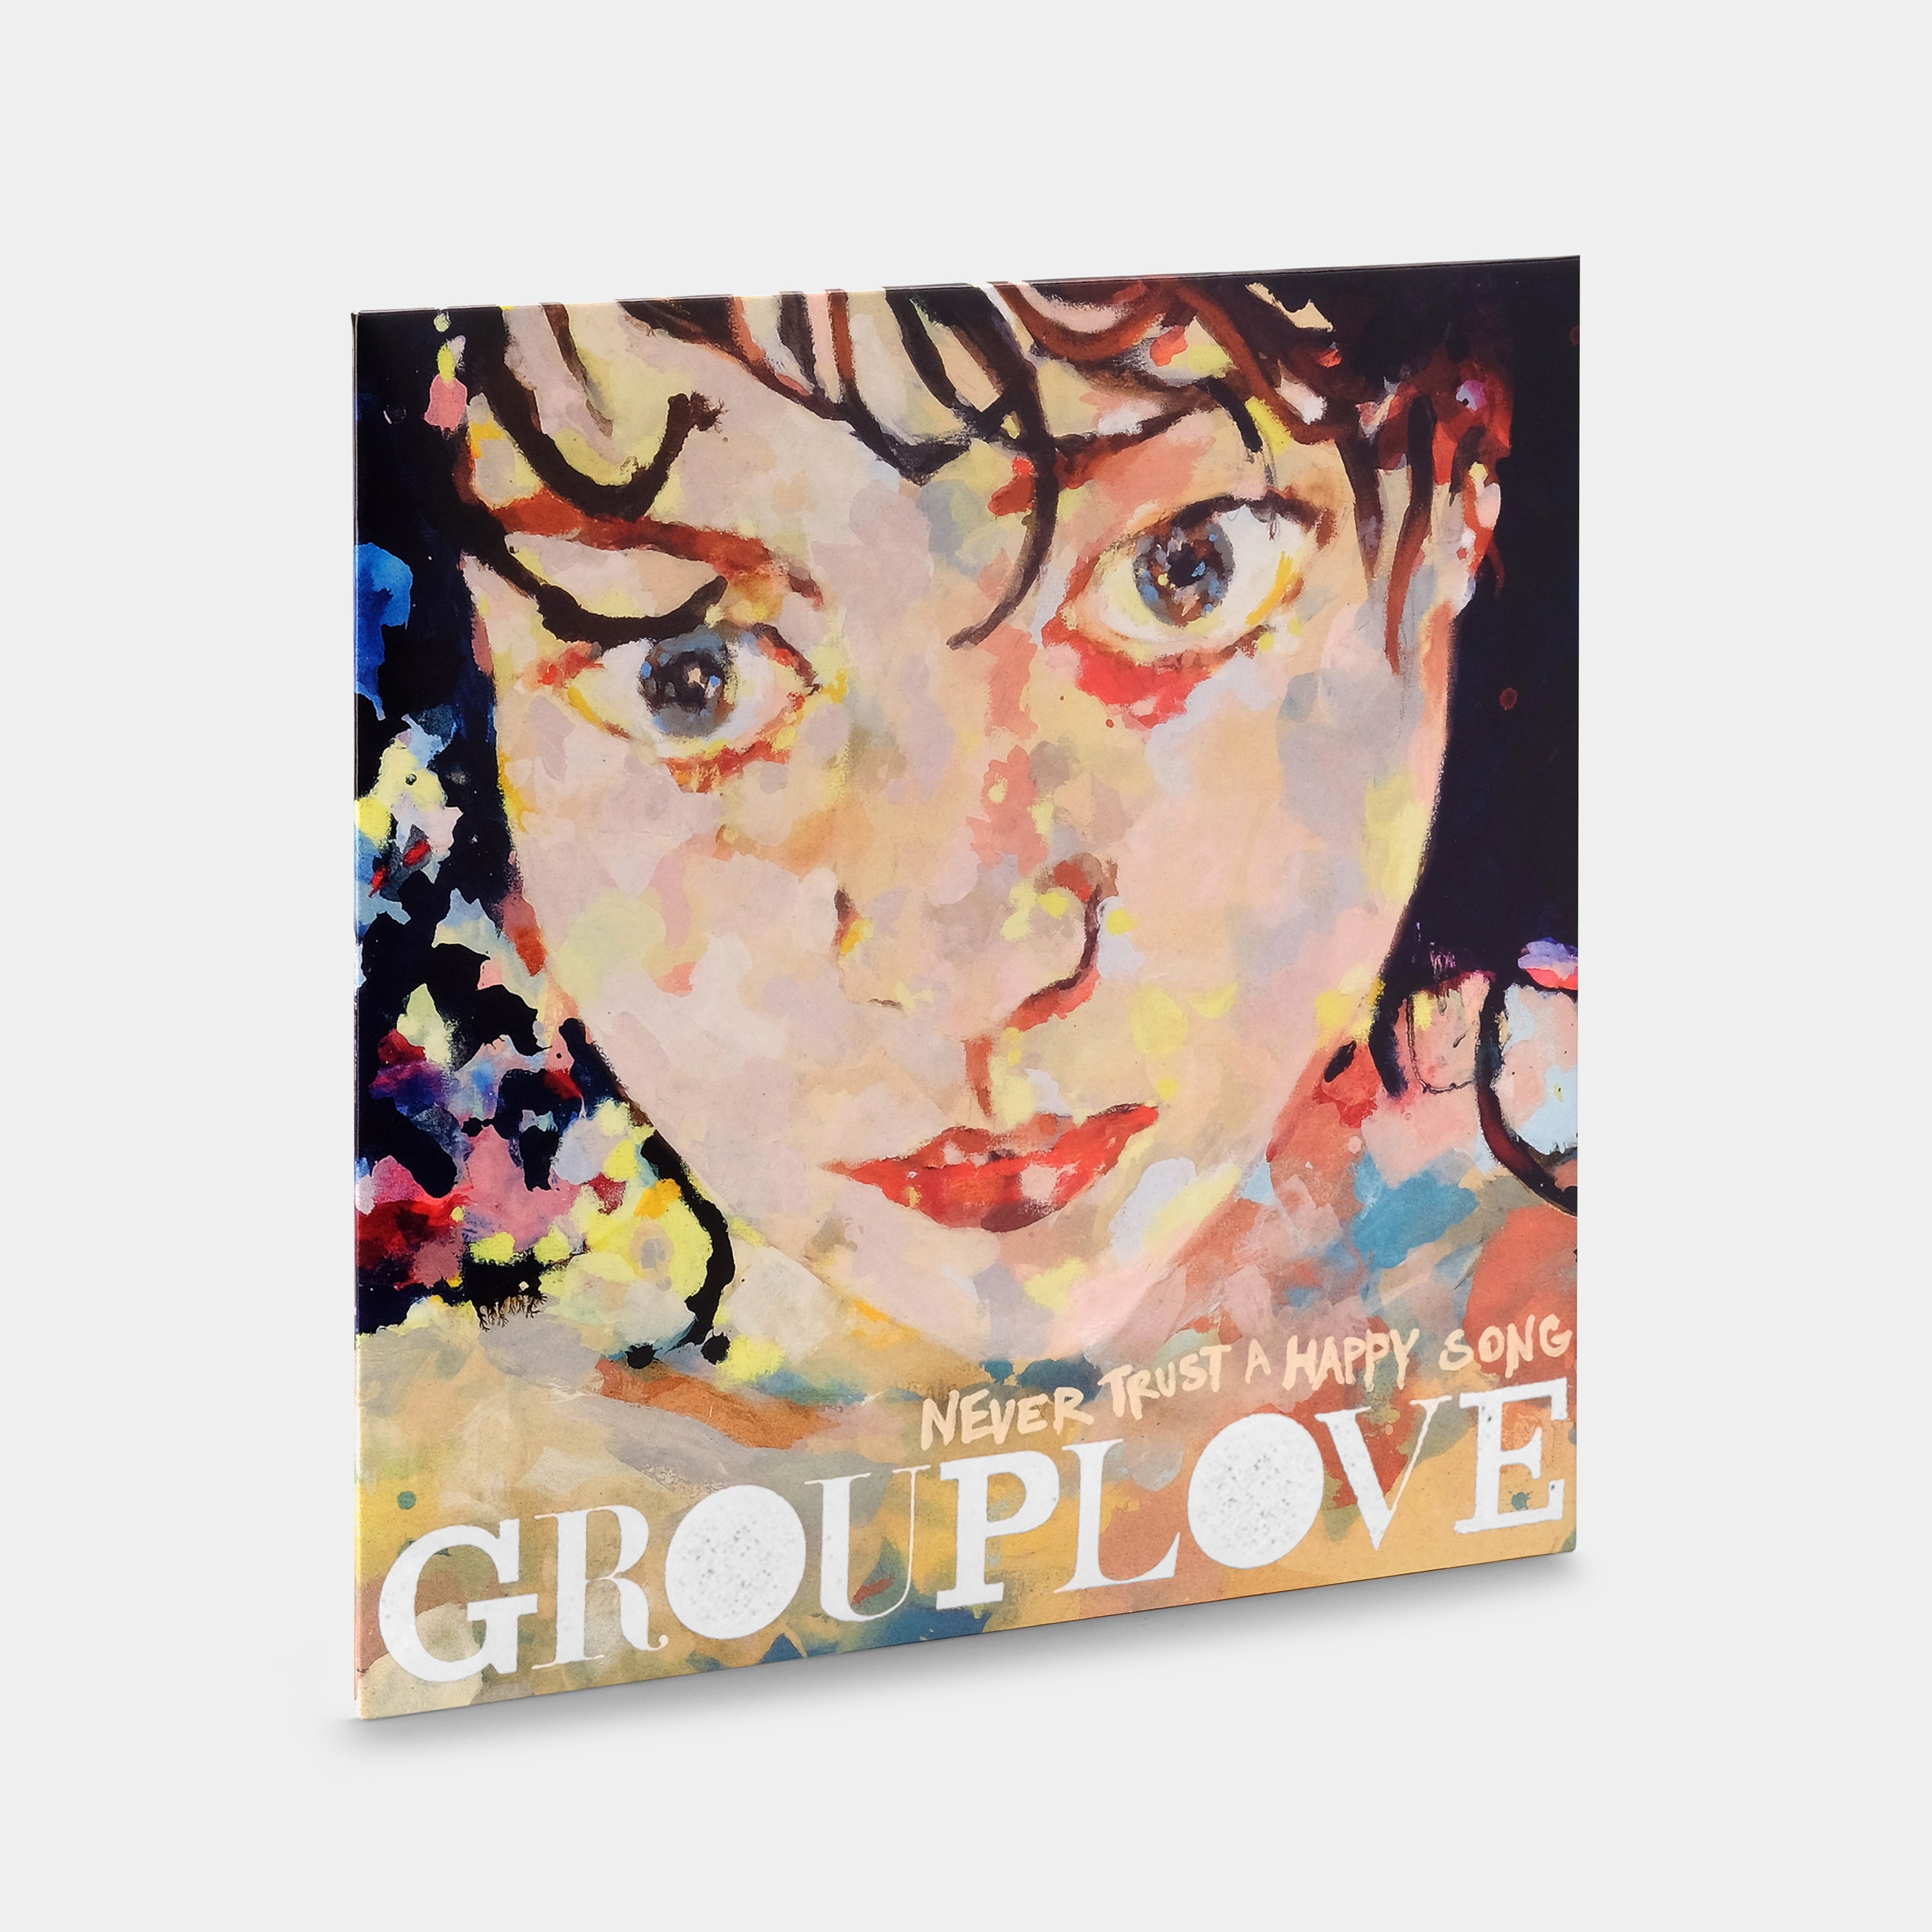 Grouplove - Never Trust A Happy Song LP Translucent Green Vinyl Record